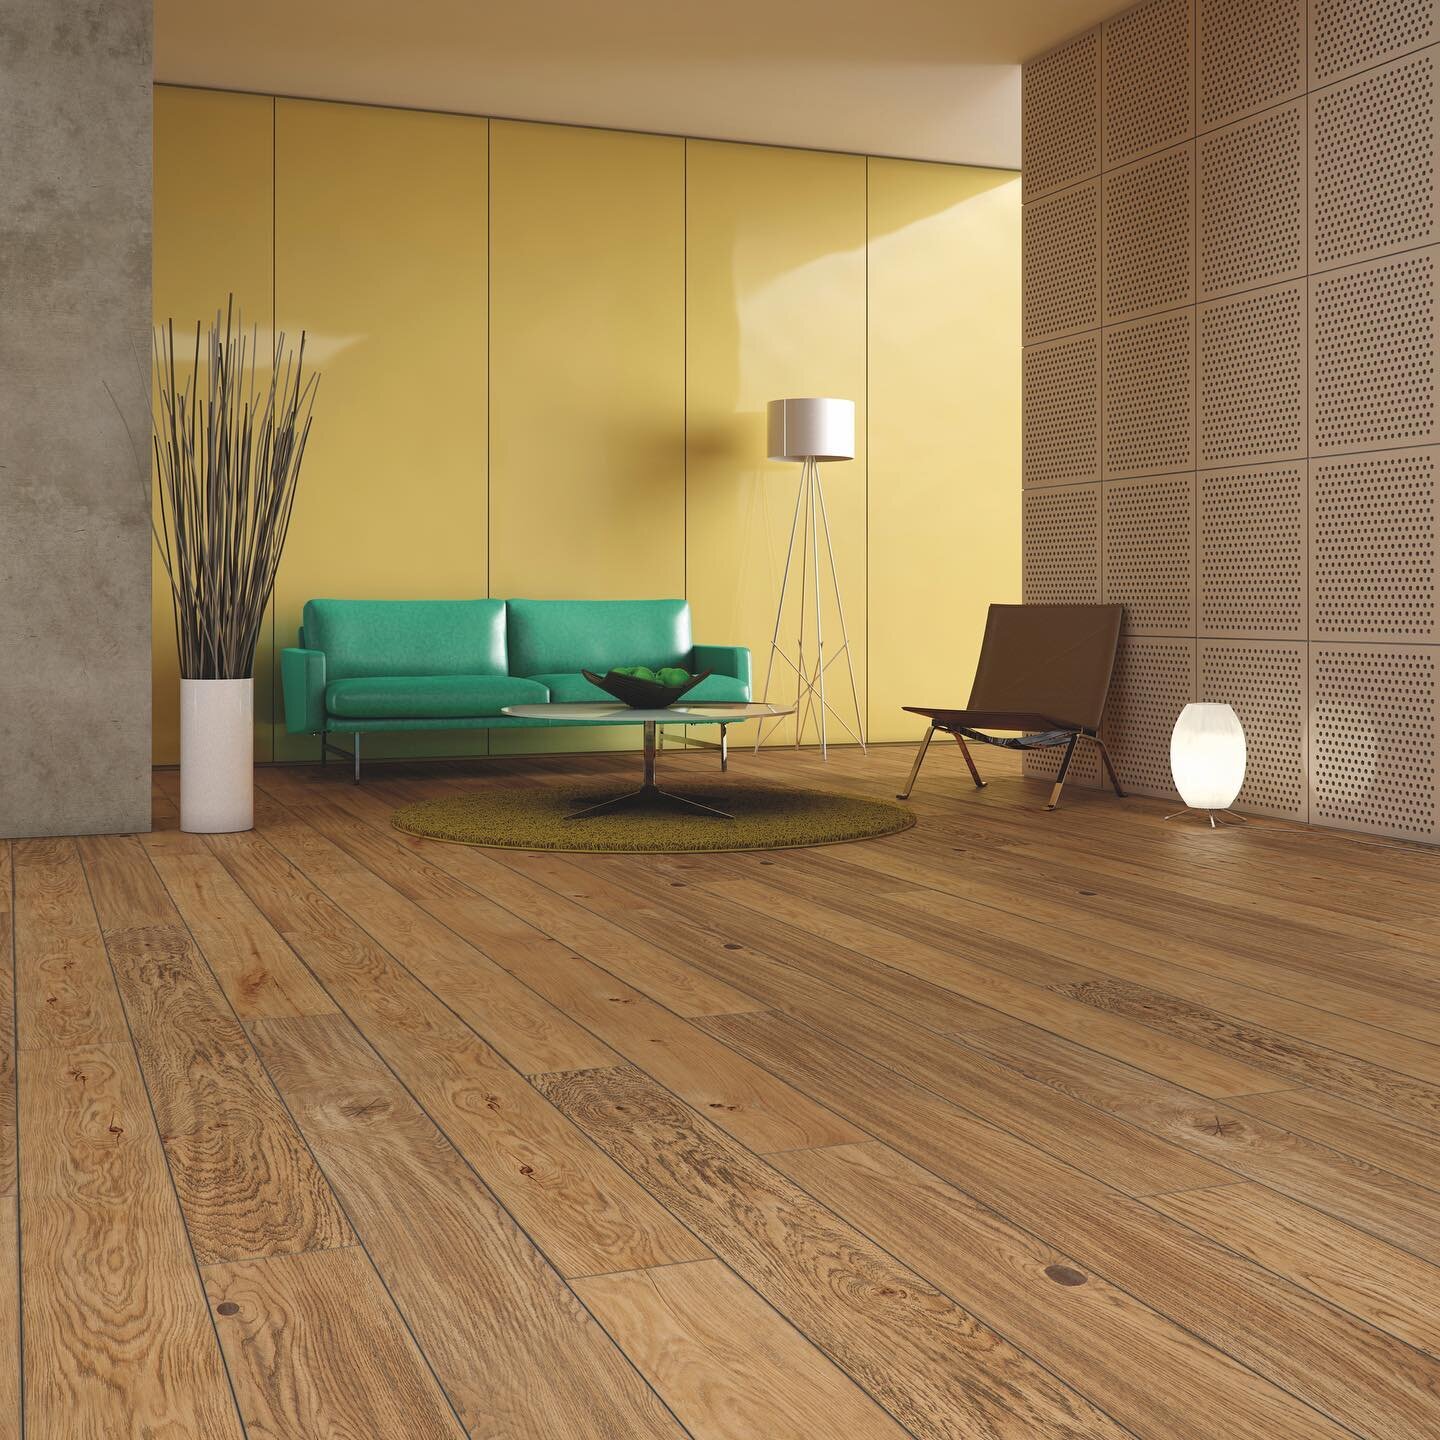 &quot;Artistically distressed oak floors&quot; &ndash; Baltic Wood's Timeless Collection&trade; is complete with unique, natural characteristics you should expect from wood flooring. @baltic_wood 
.
.
.
#cpsupply #buildingmaterials #balticwood #oakfl